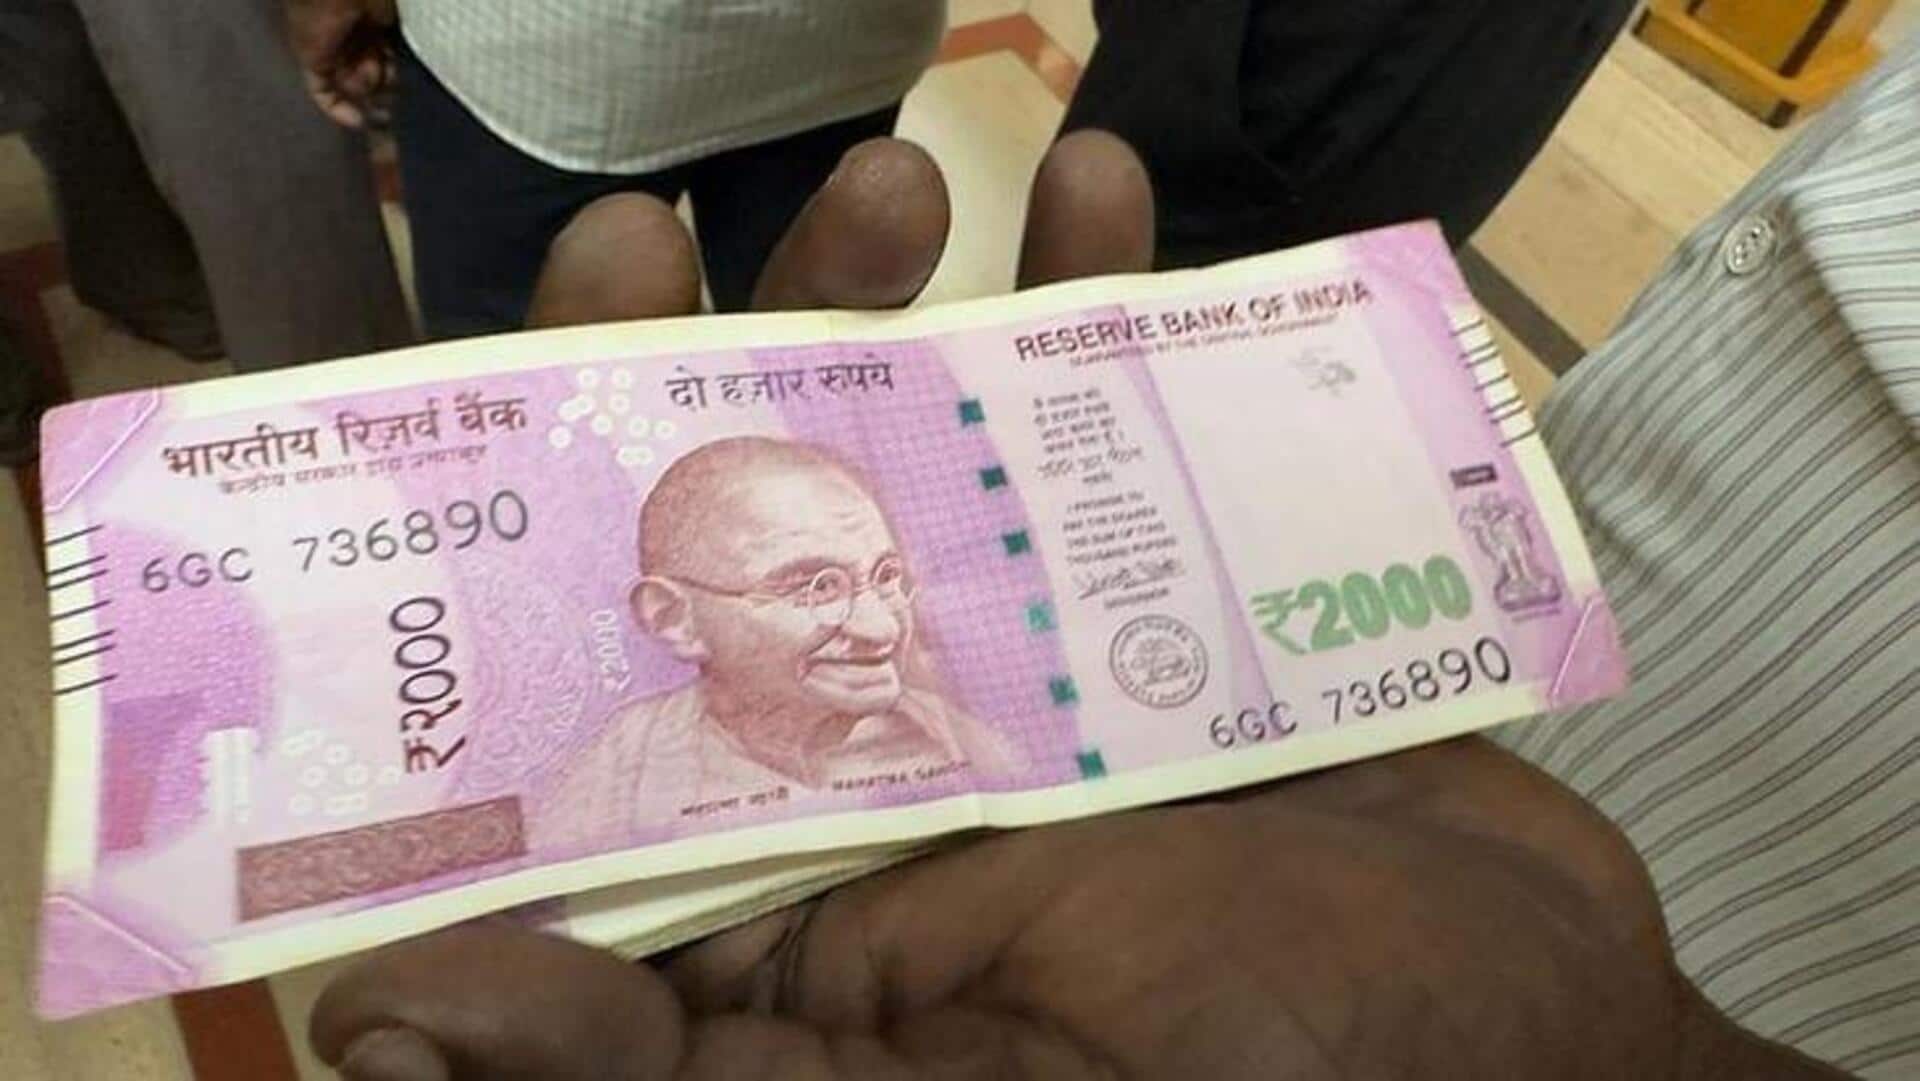 Consequences of holding Rs. 2,000 notes post September 30 deadline